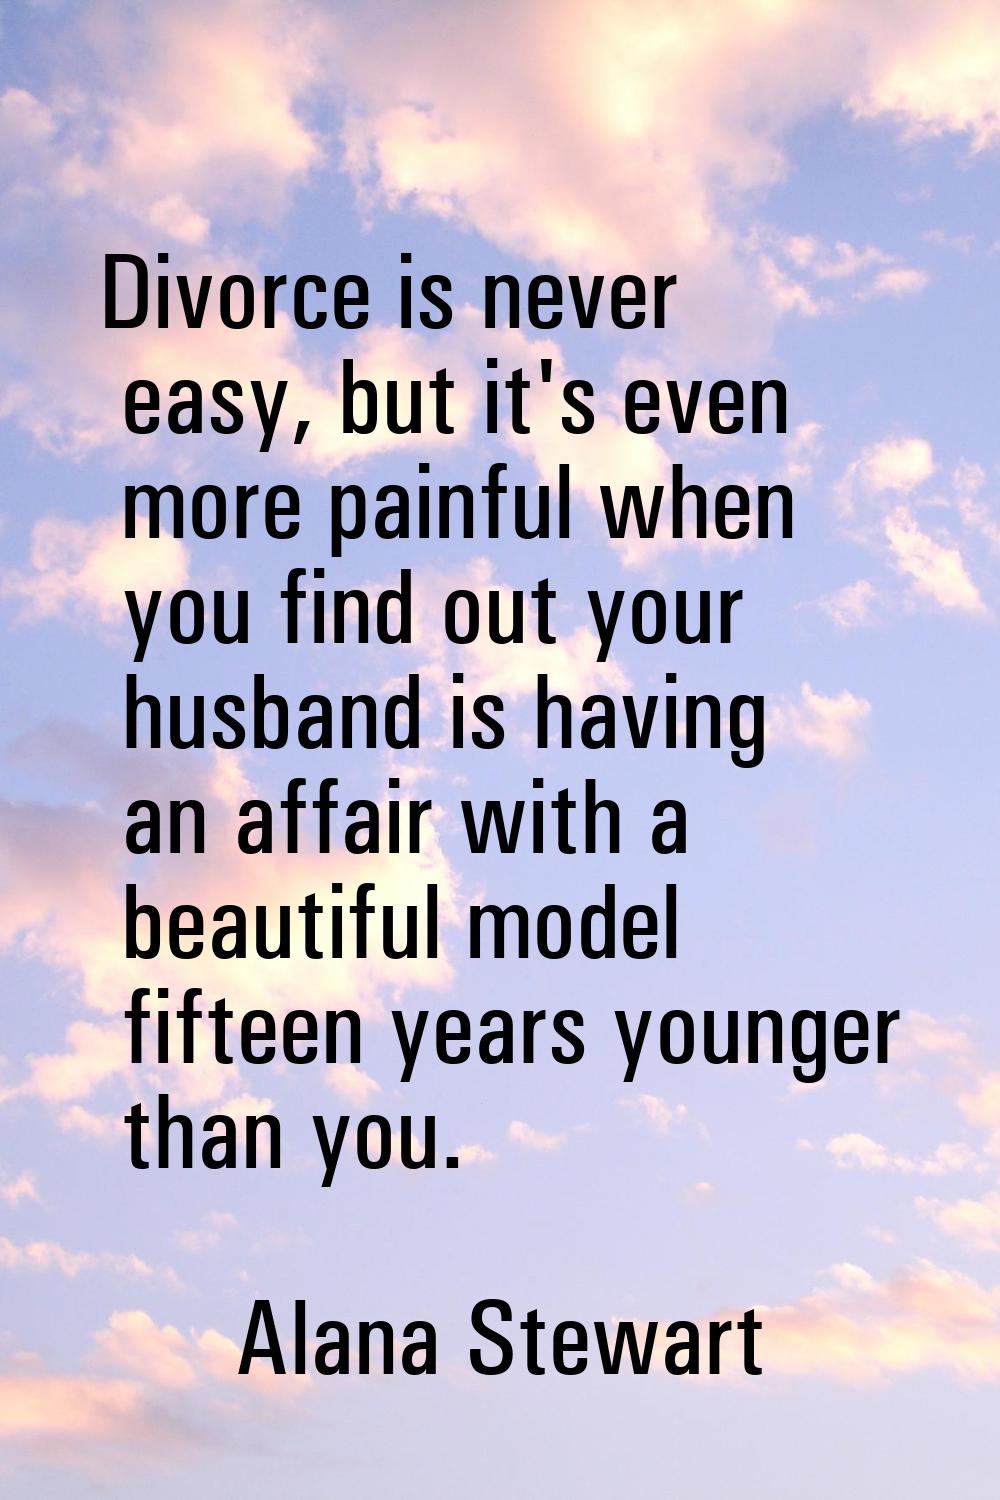 Divorce is never easy, but it's even more painful when you find out your husband is having an affai